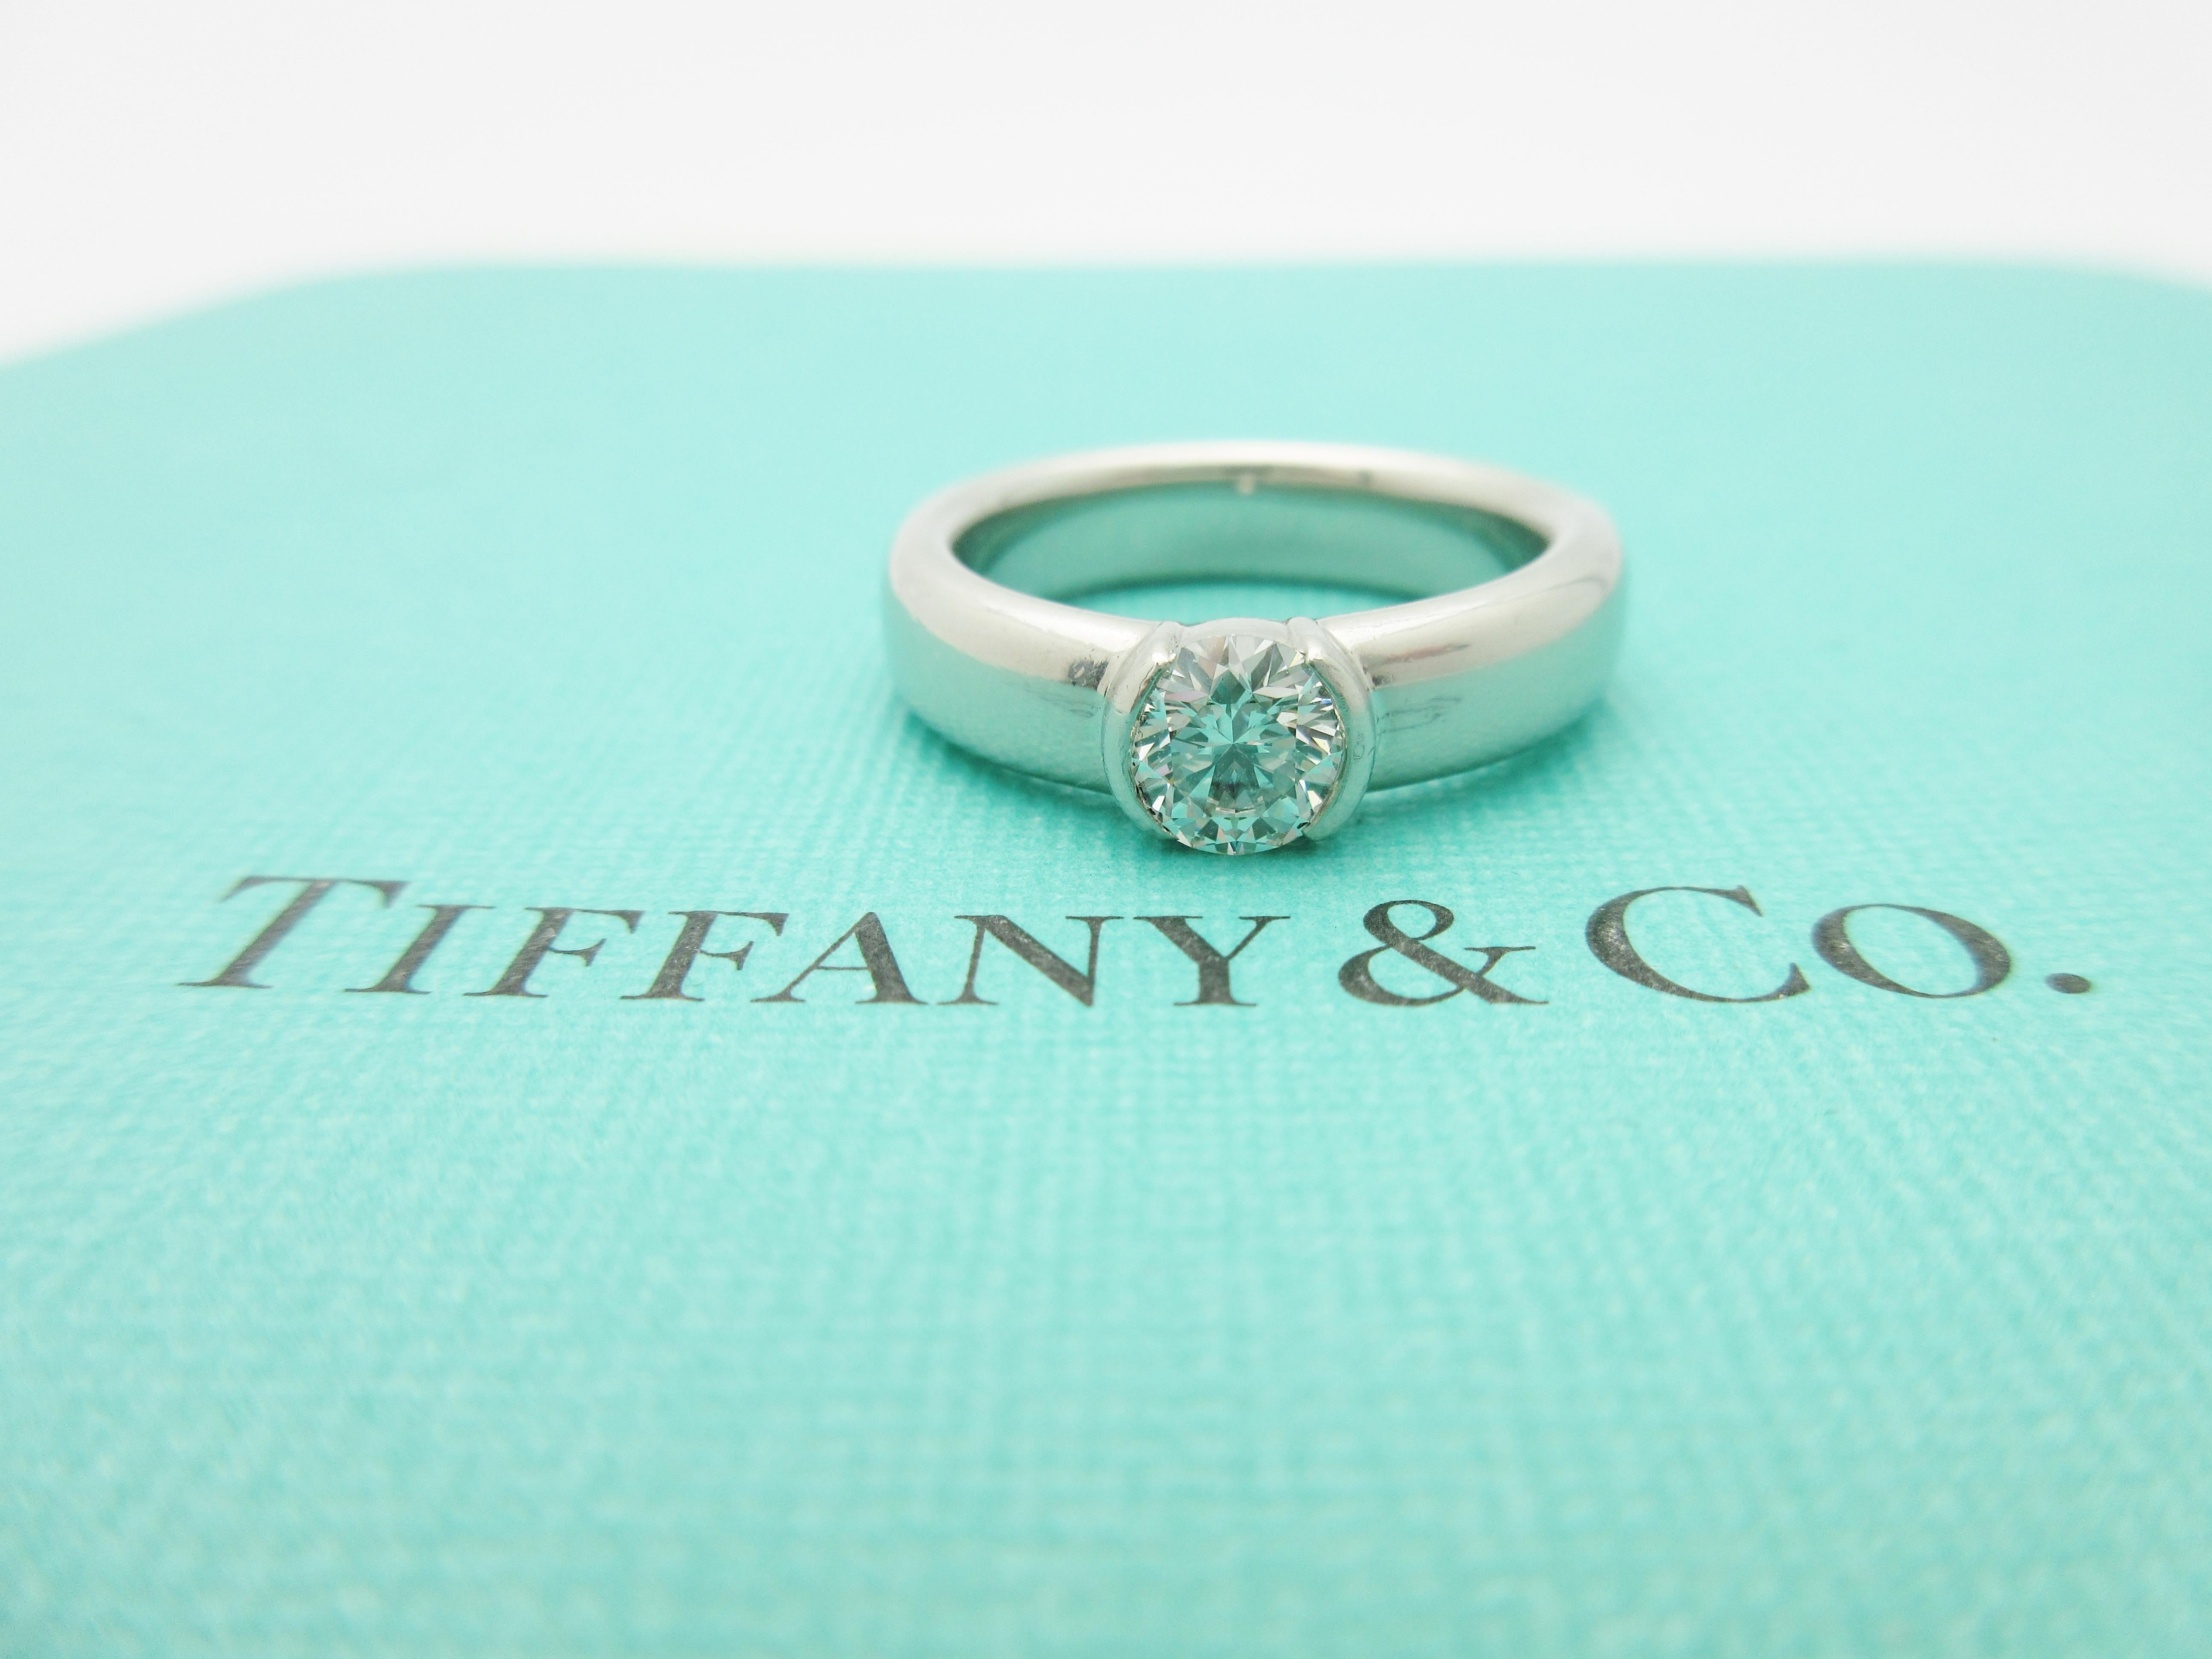 This gorgeous piece from the famed Tiffany & Co. jewelry house is a fiery diamond dazzler.

The focal point of this engagement ring is a Tiffany-graded natural diamond. Weighing .70ct, it has been graded I in color and VS2 clarity by Tiffany's